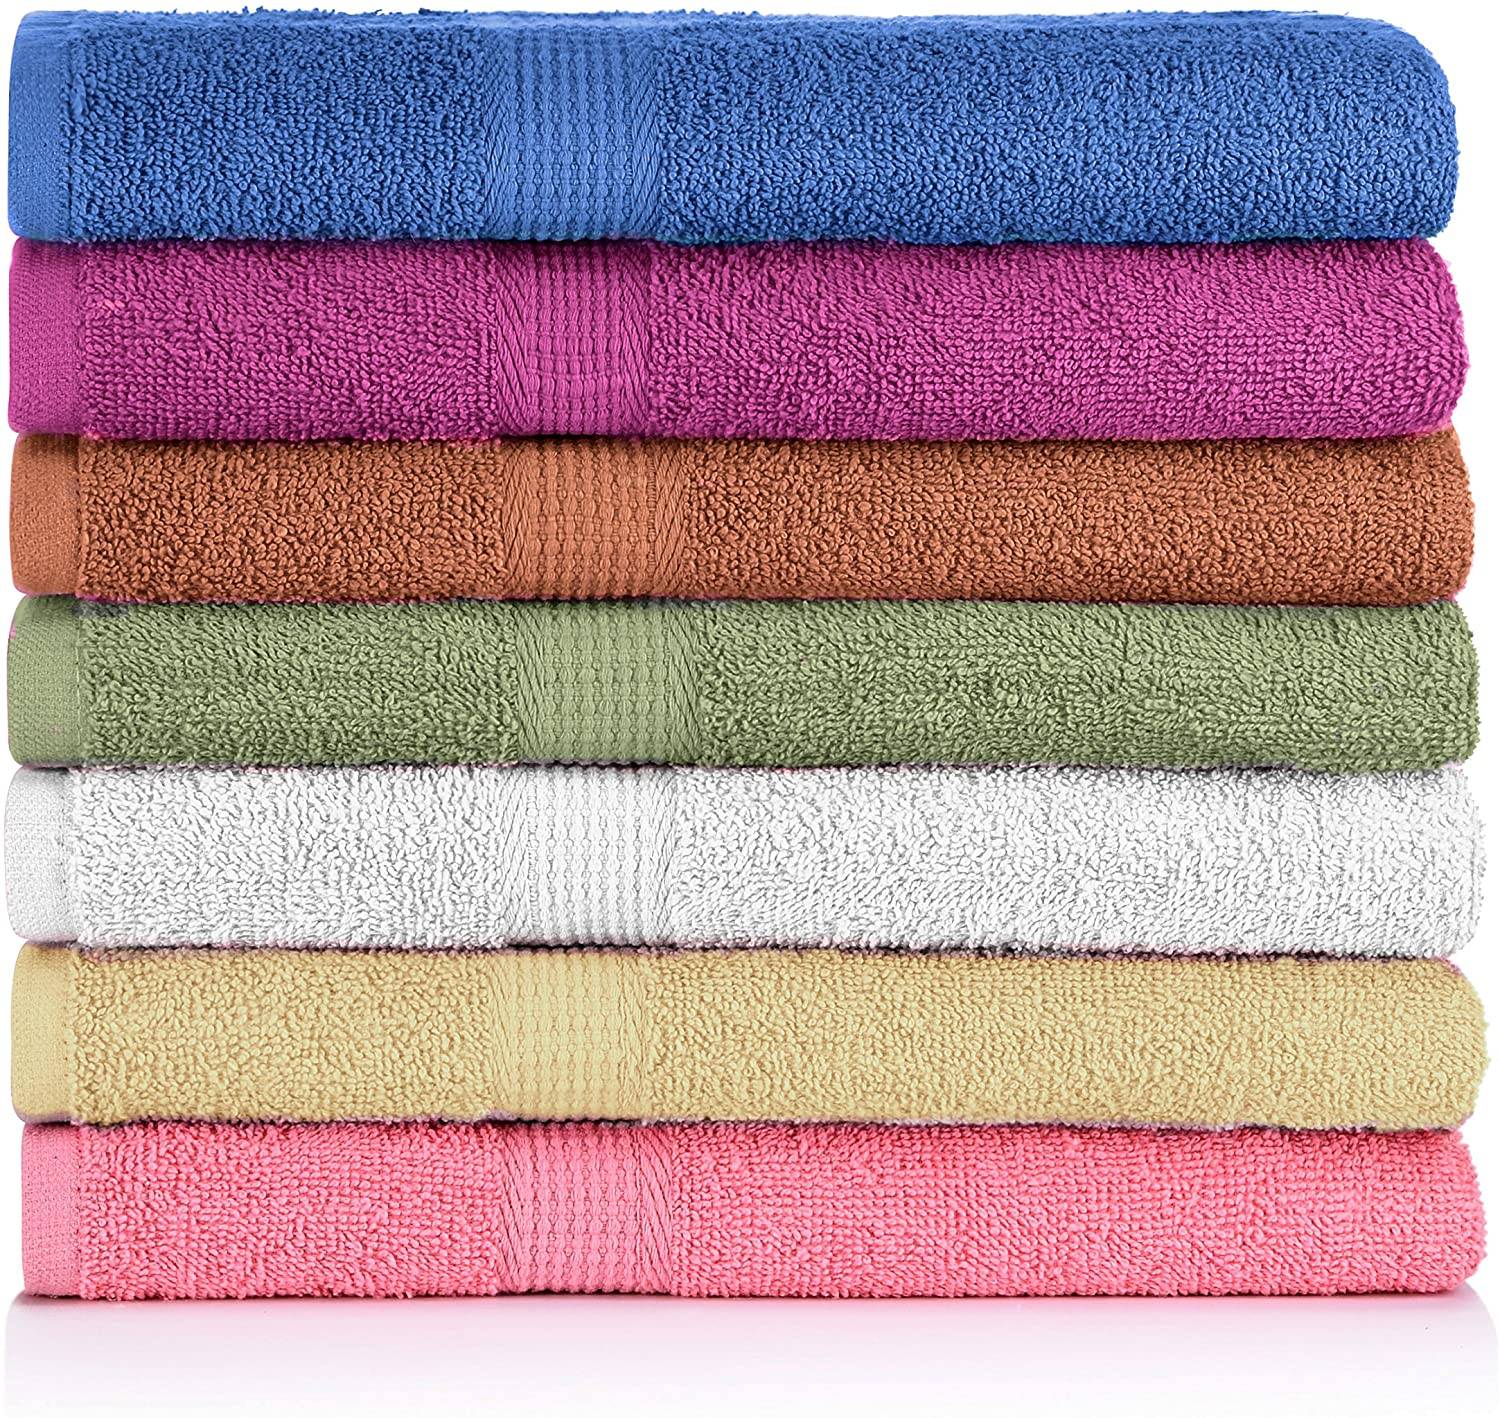 Reliable Supplier Chair Pad - Towels/beach towel/ Bath Towels ,Extra-Absorbent – 100% Cotton – 27×54” Towels, Soft and Quick Dry Swim Terry towels with bright colors   – SUPER